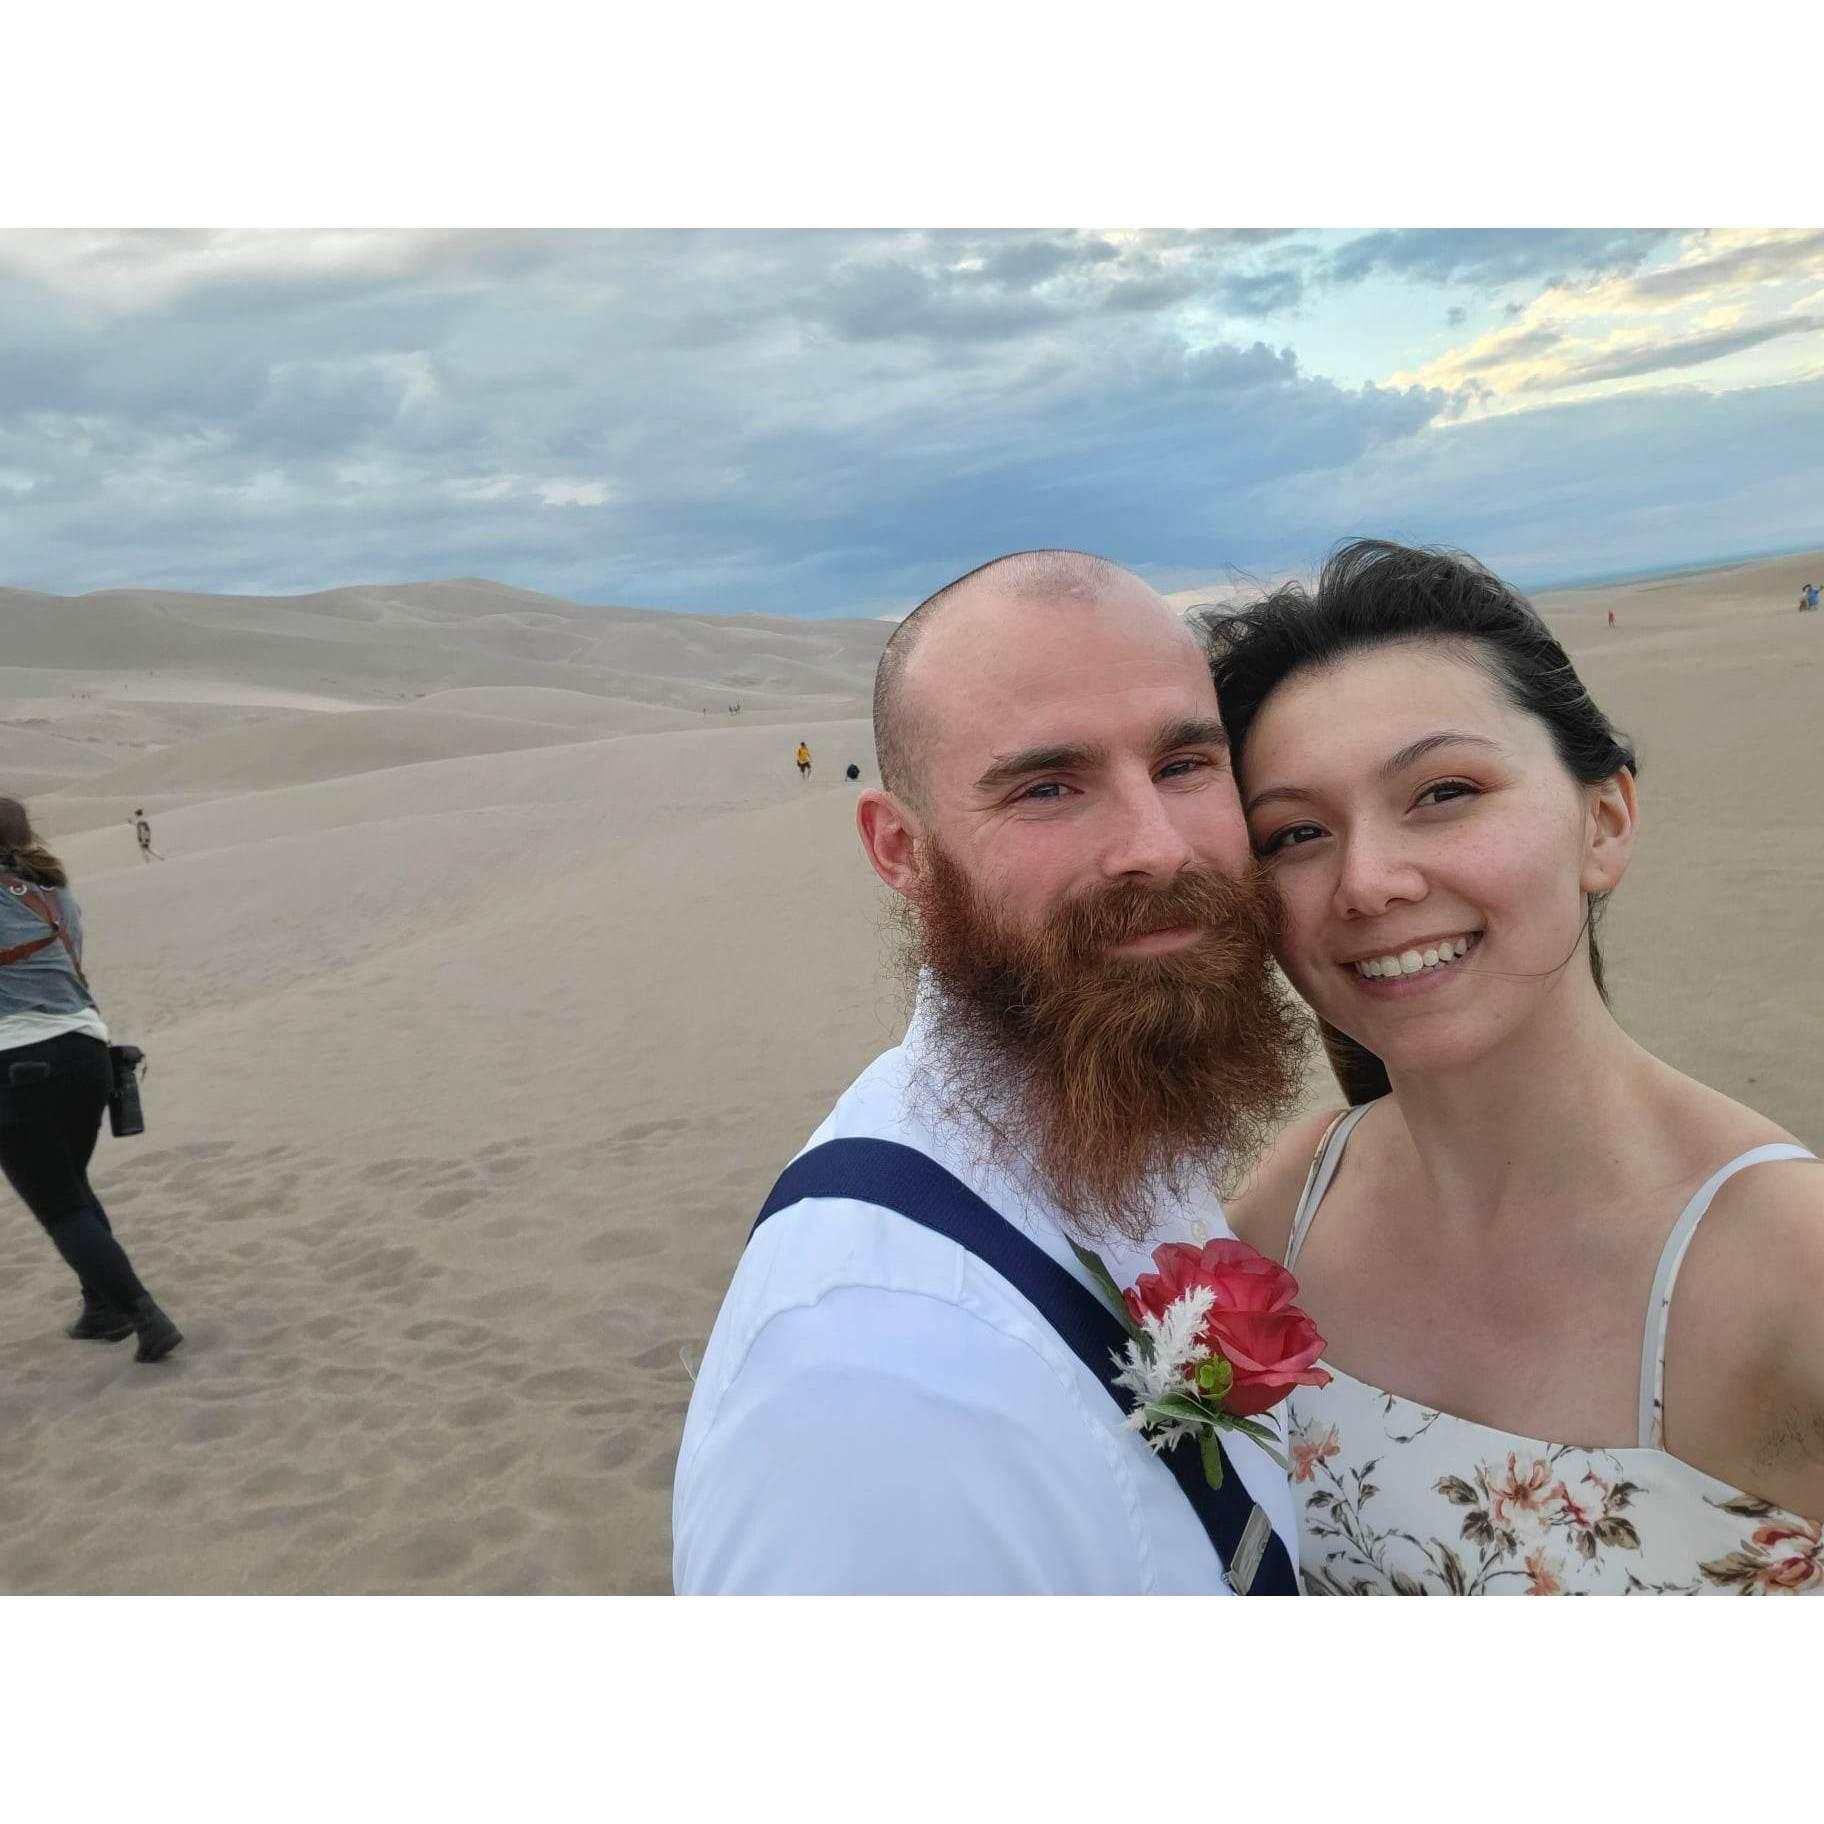 Great Sand Dunes, Colorado for John and Stormi's wedding!